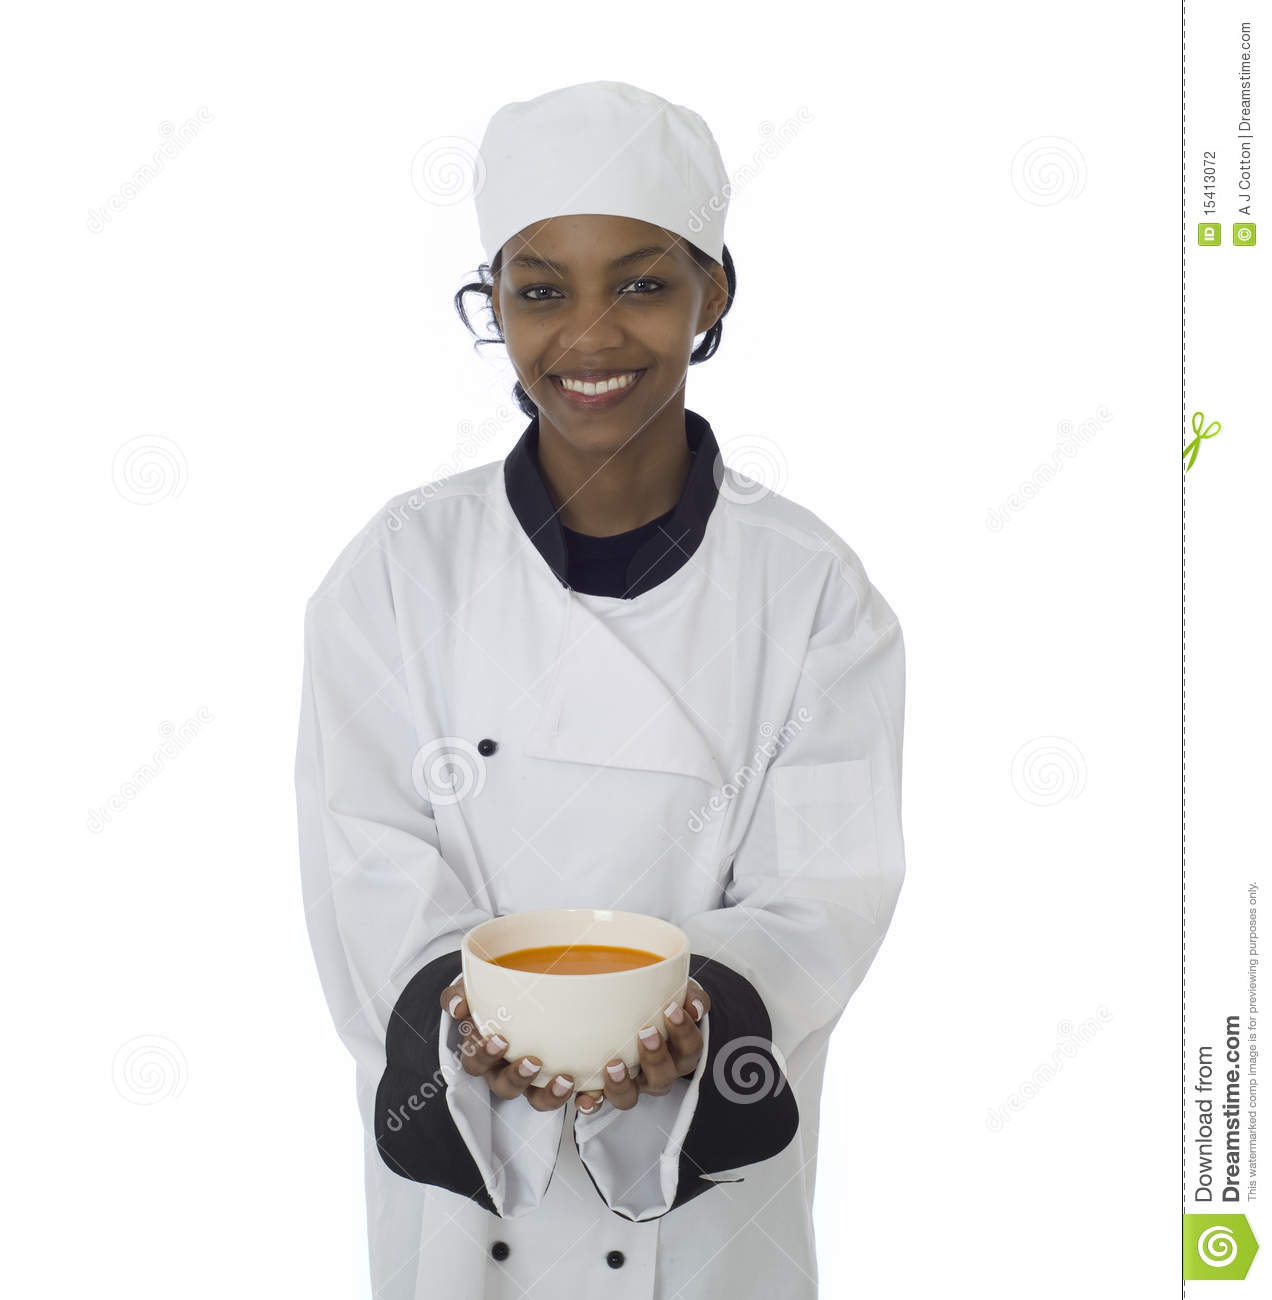 Professional Chef In Work Wear Jacket Serving Soup Isolatated On White